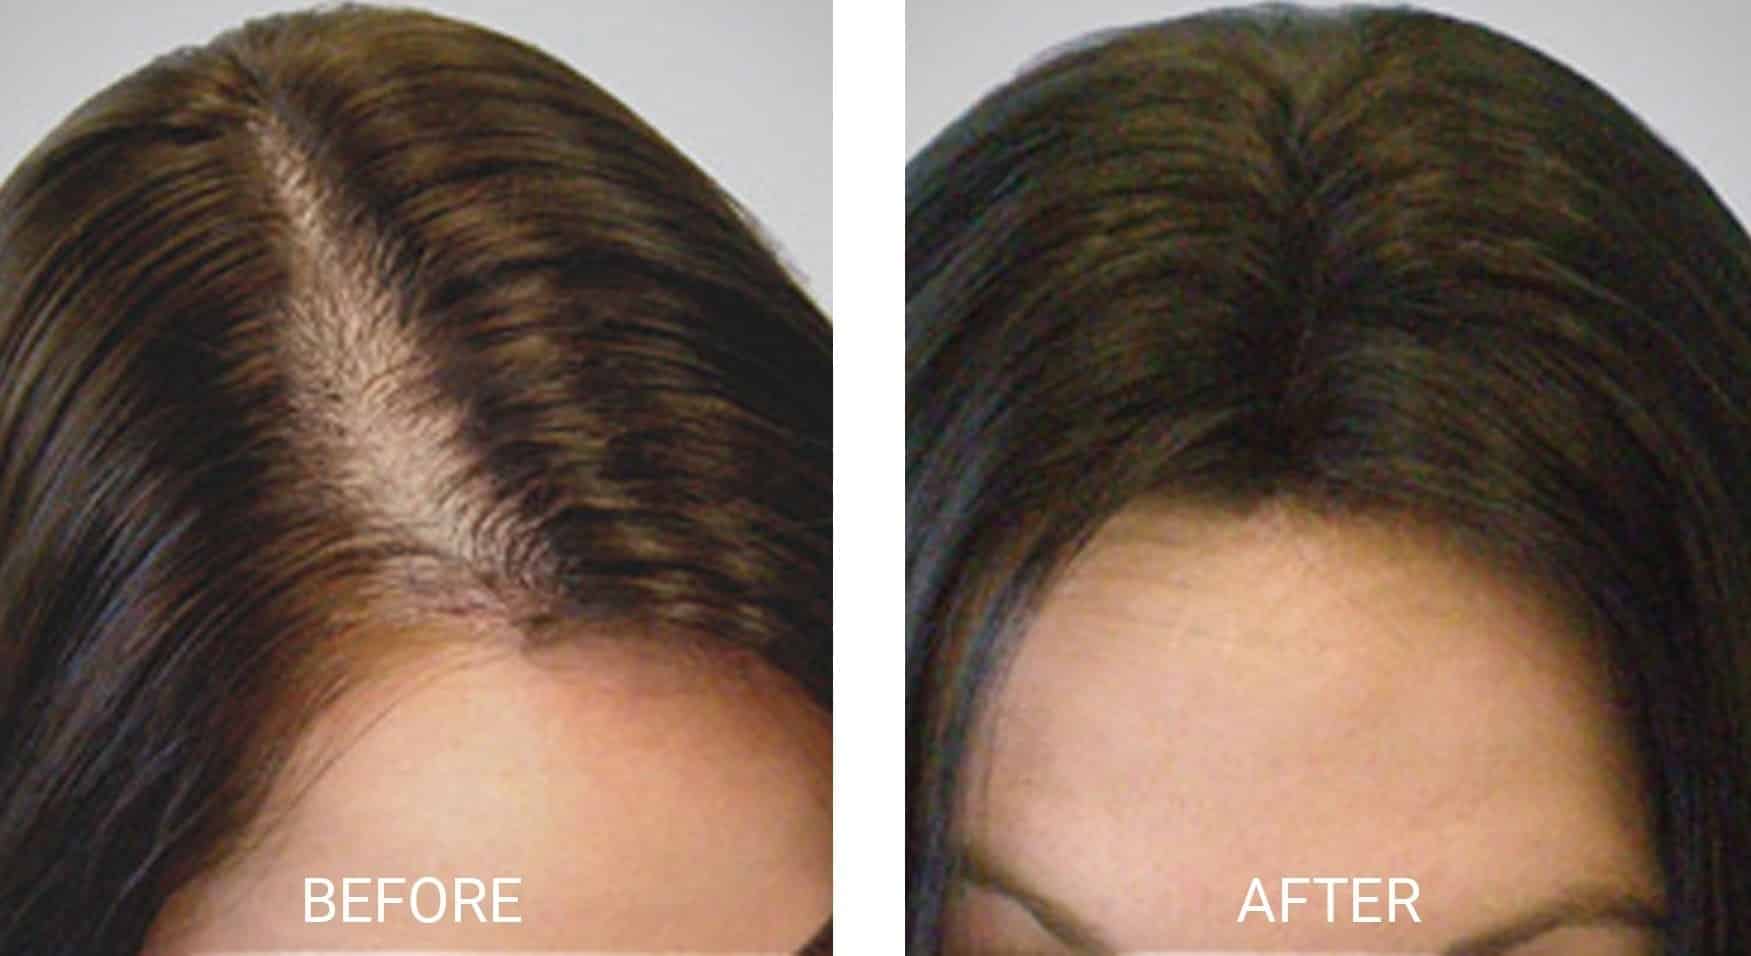 woman before and after PRF Hair Restoration treatment